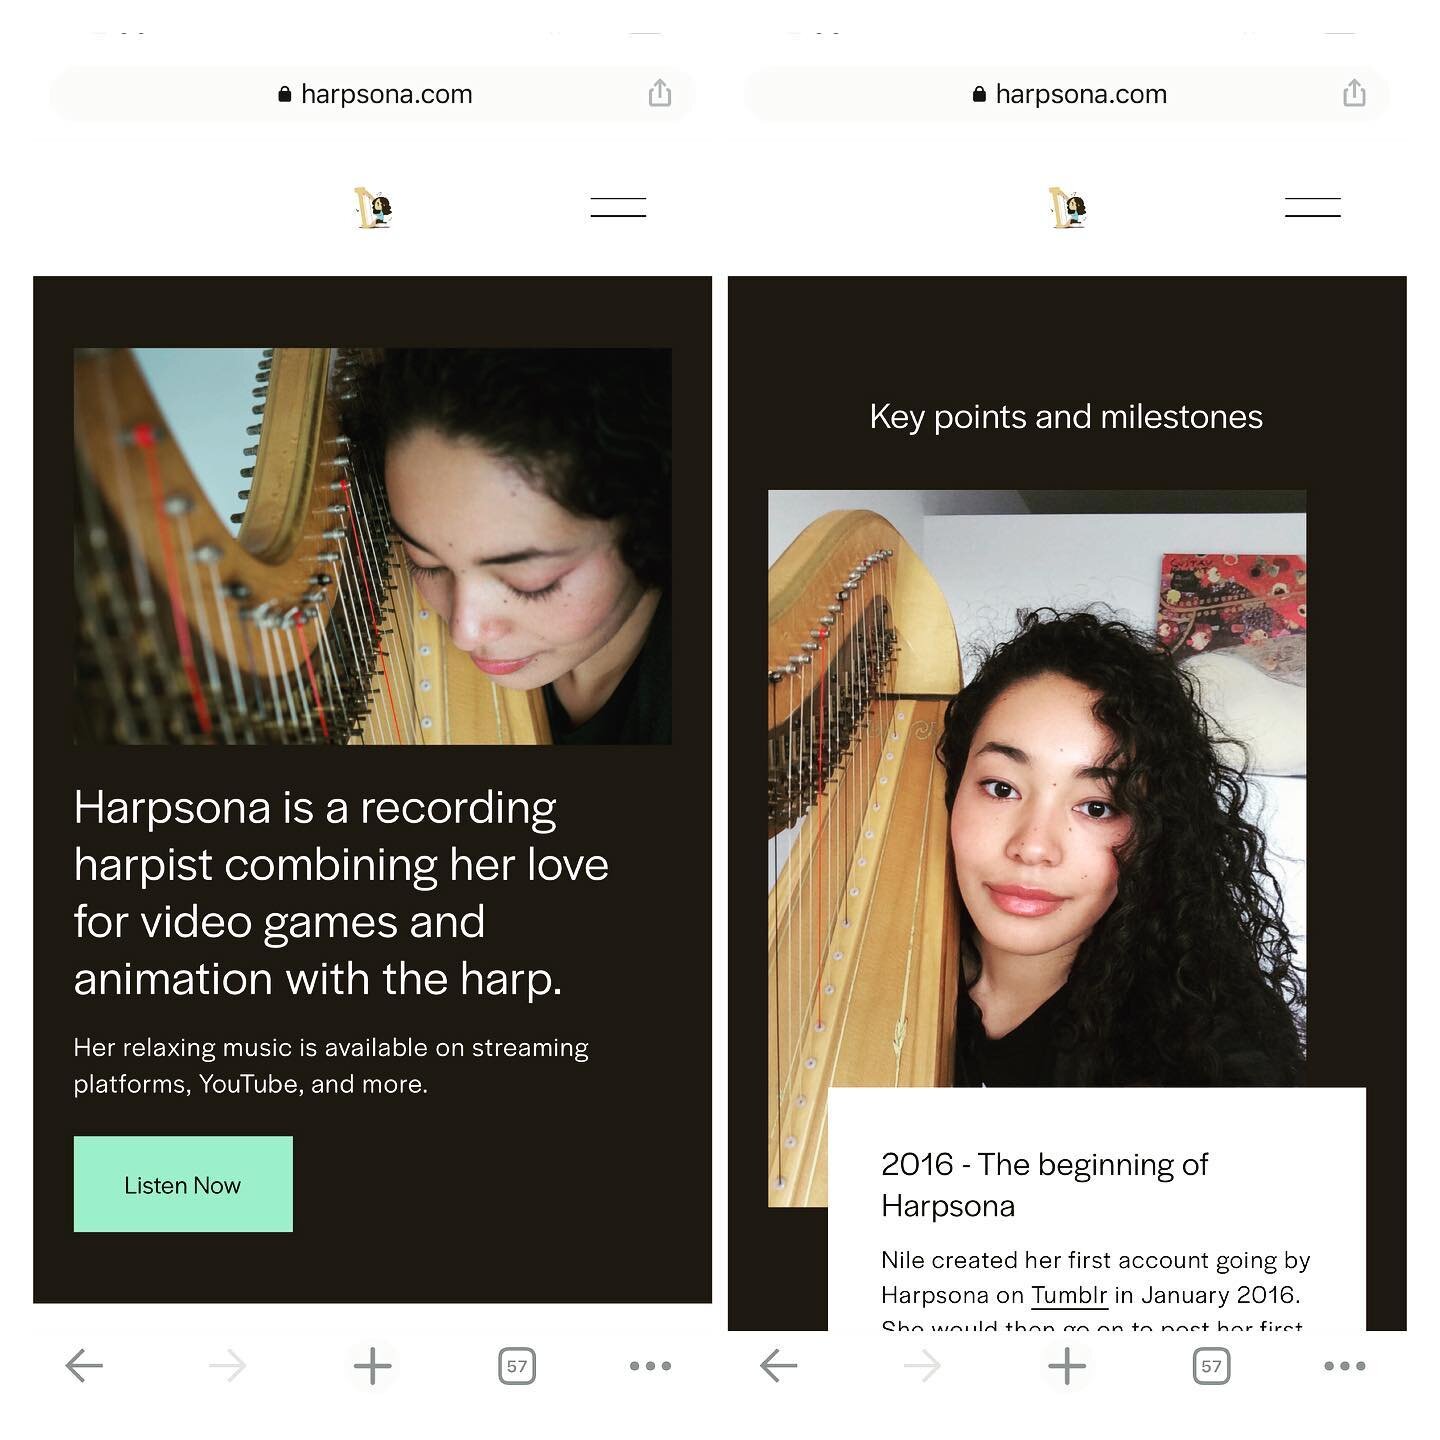 I finally made a website! ✨ 
Check it out if you&rsquo;re interested in how I got started or want to learn about more than what I&rsquo;ve posted here on Instagram!

www.harpsona.com

#harp #harpist #practicalharpist